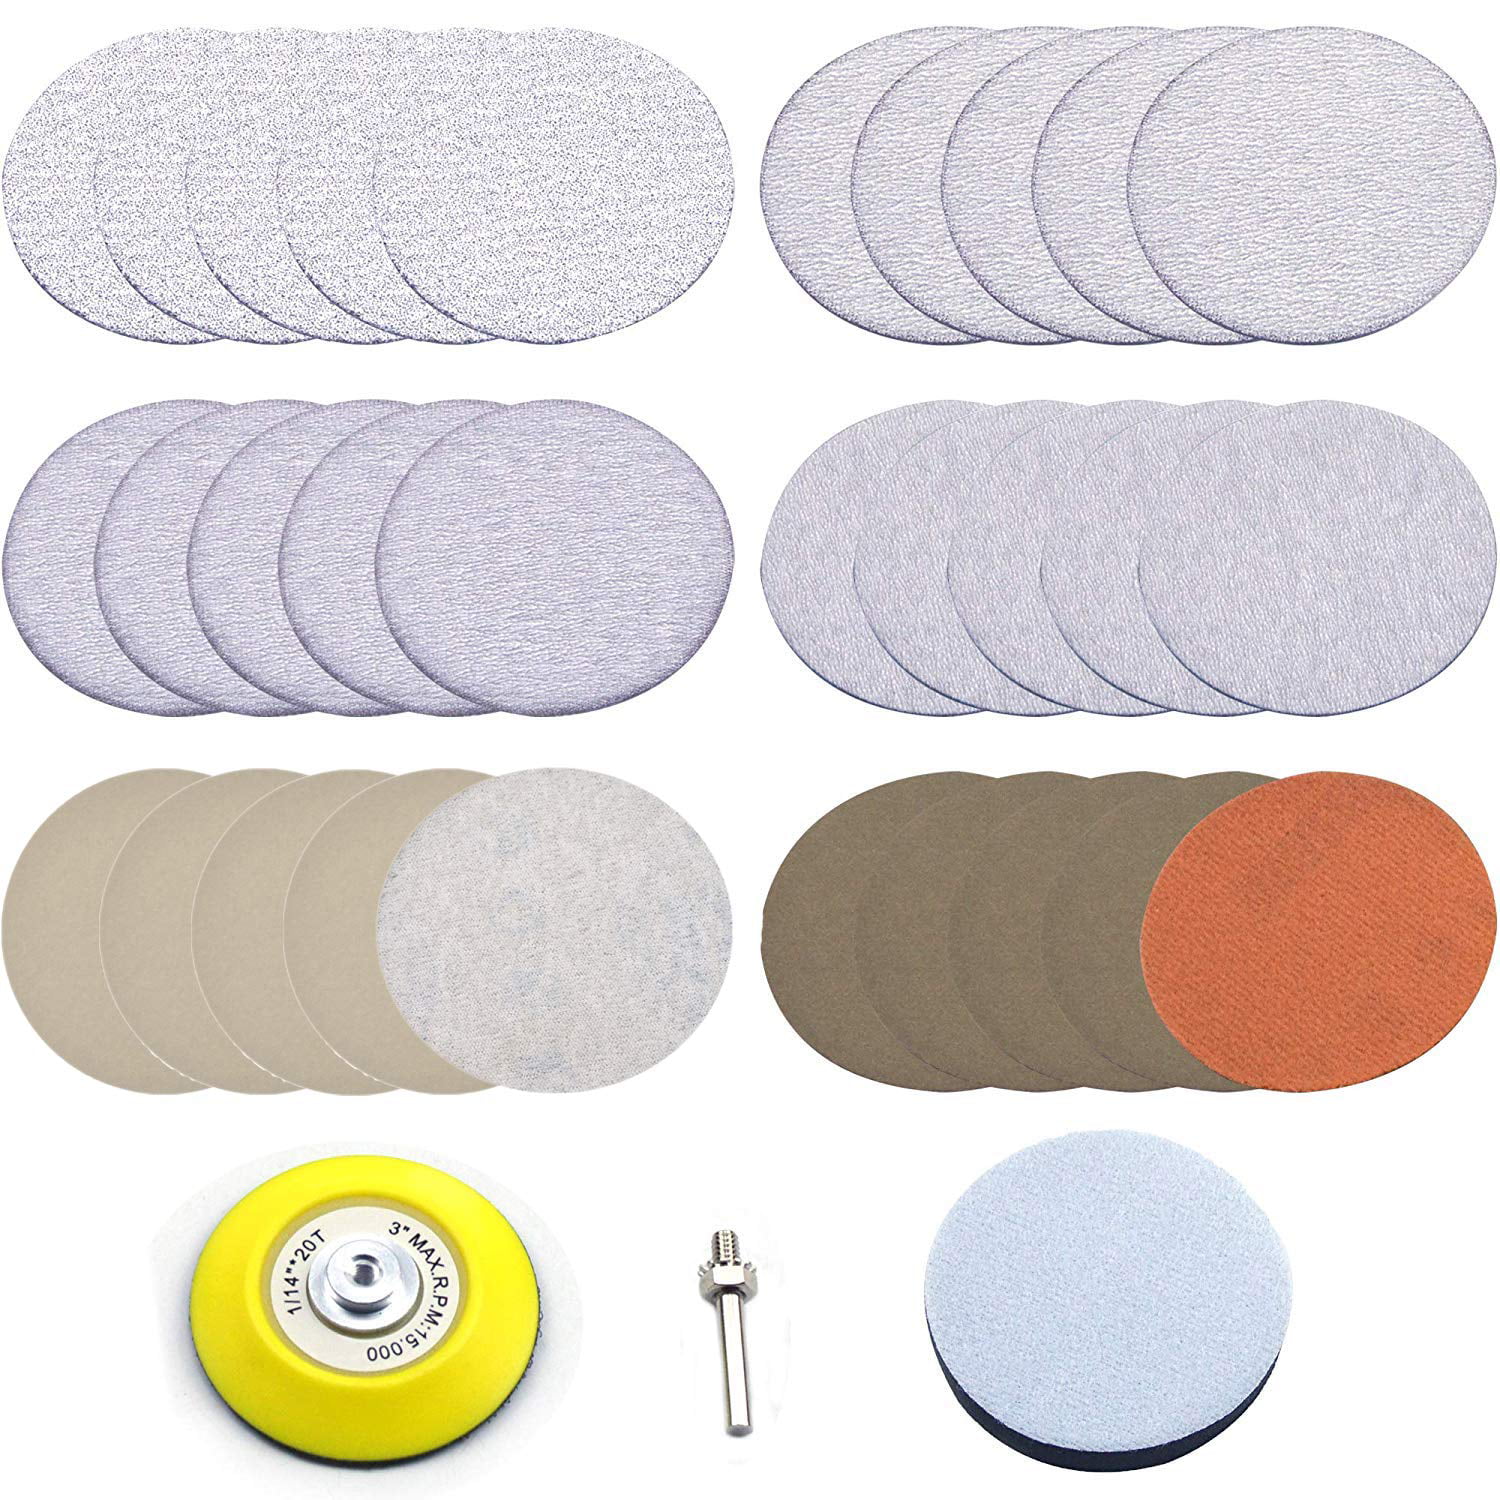 Soft Foam Buffering Pad for DIY Woodworking 3 Inch 5000 Grit Aluminum Oxide Waterproof Wet/Dry Hook and Loop Sanding Discs with a 1/4 inch Shank Backing Pad 30-Pack